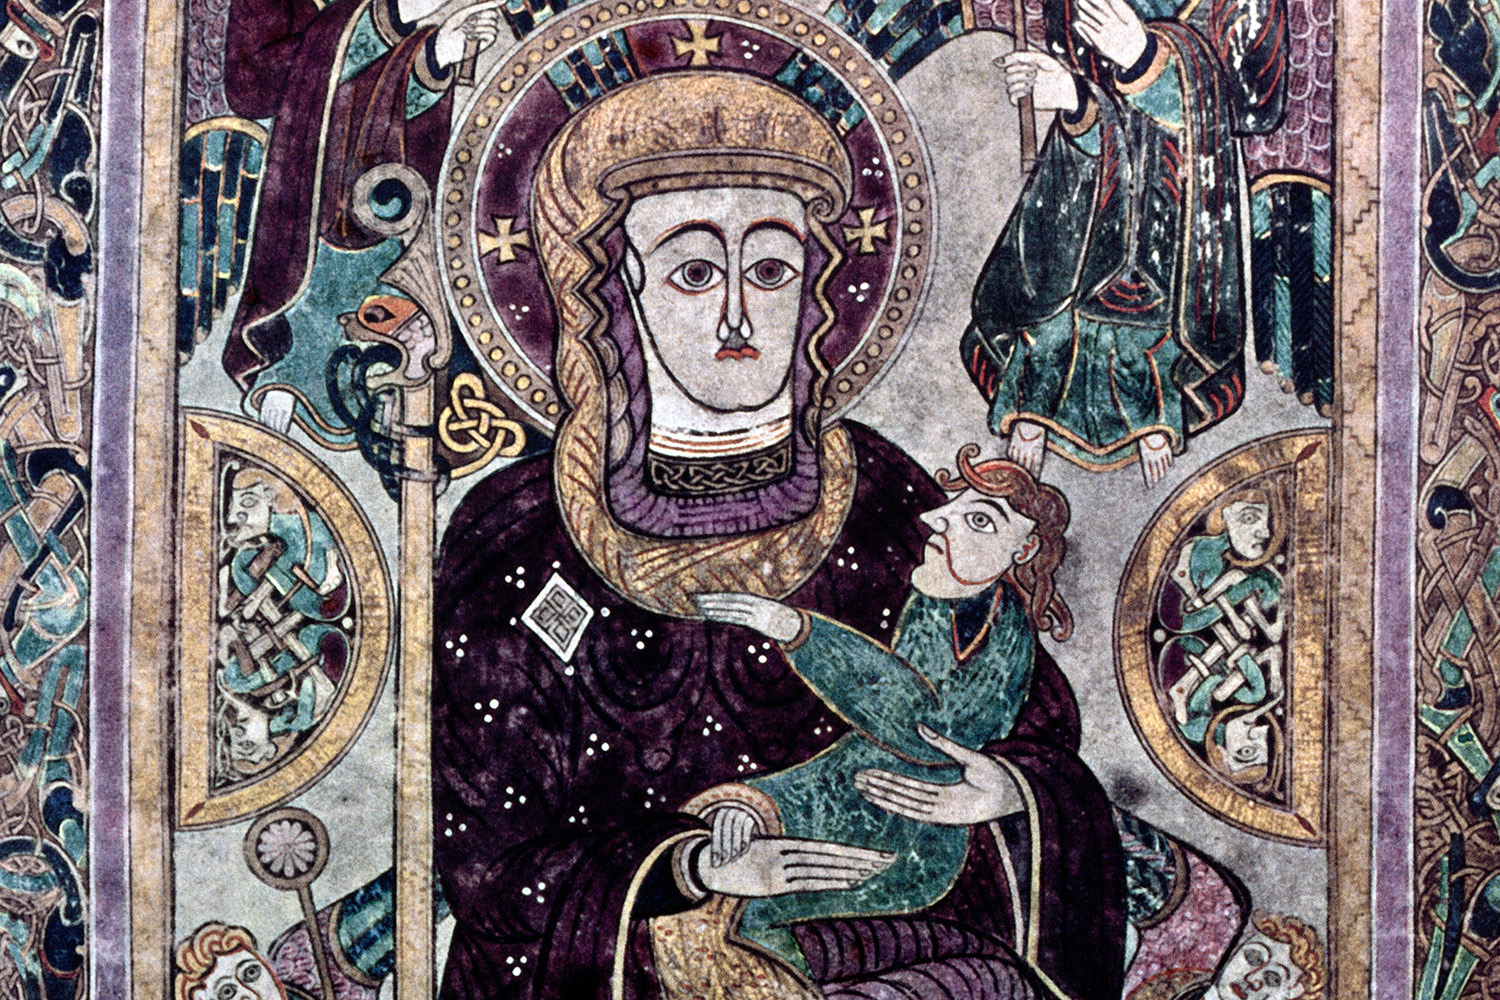 The Virgin and Child depicted in the Book of Kells, 9th century. 